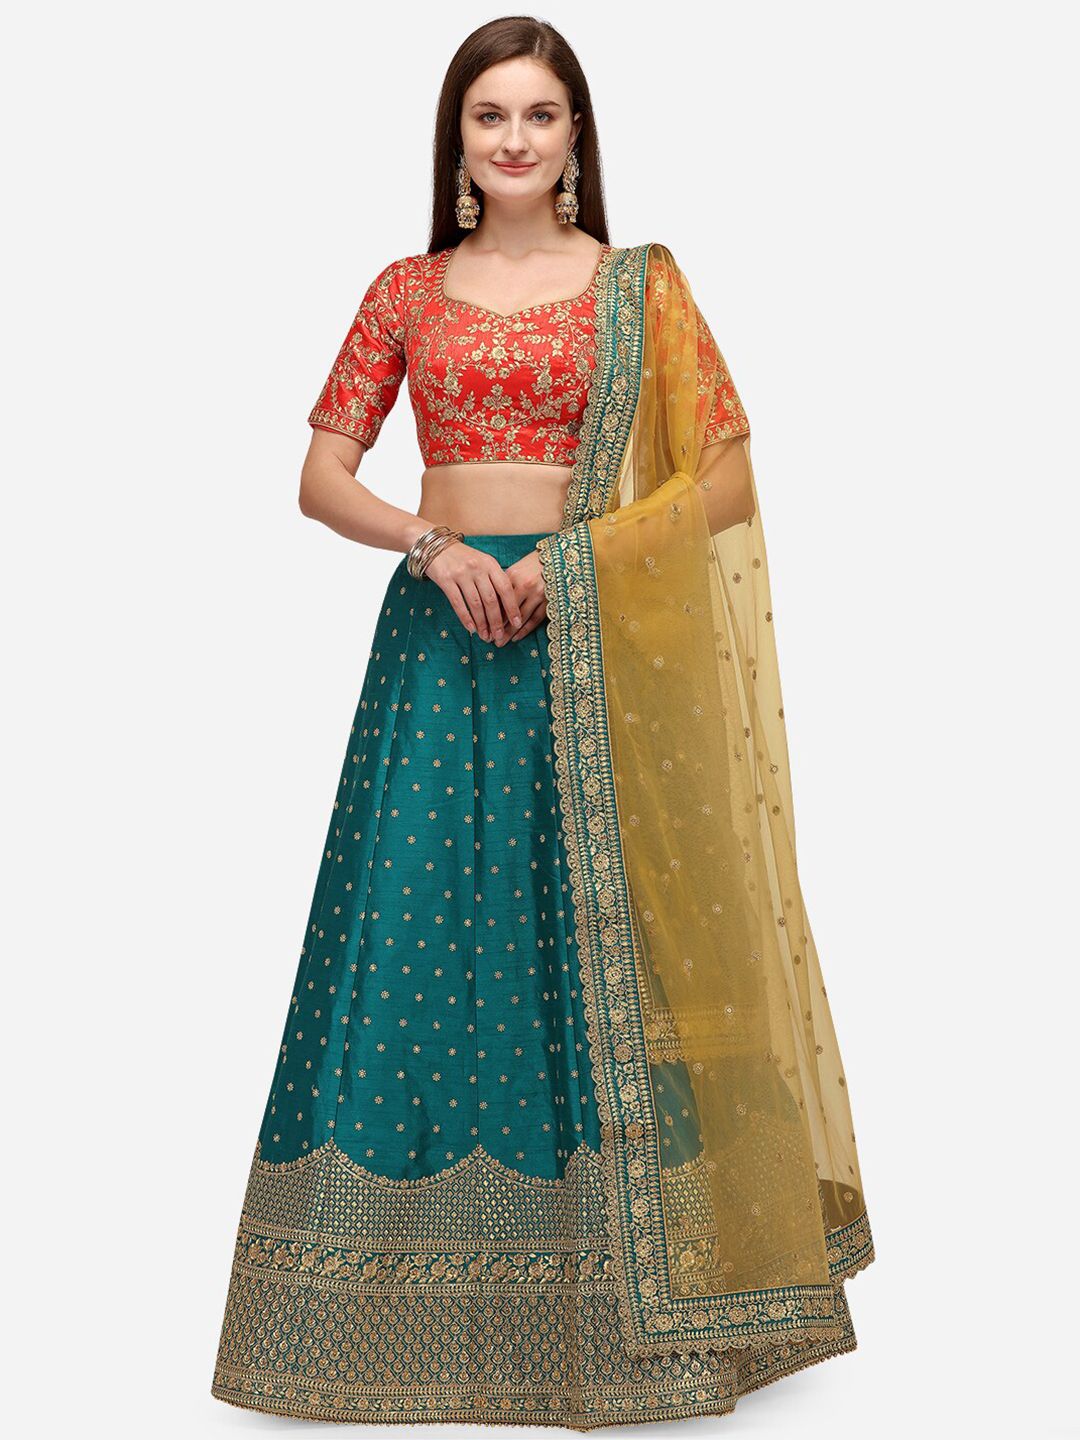 NAKKASHI Green & Red Embroidered Semi-Stitched Lehenga & Unstitched Blouse With Dupatta Price in India